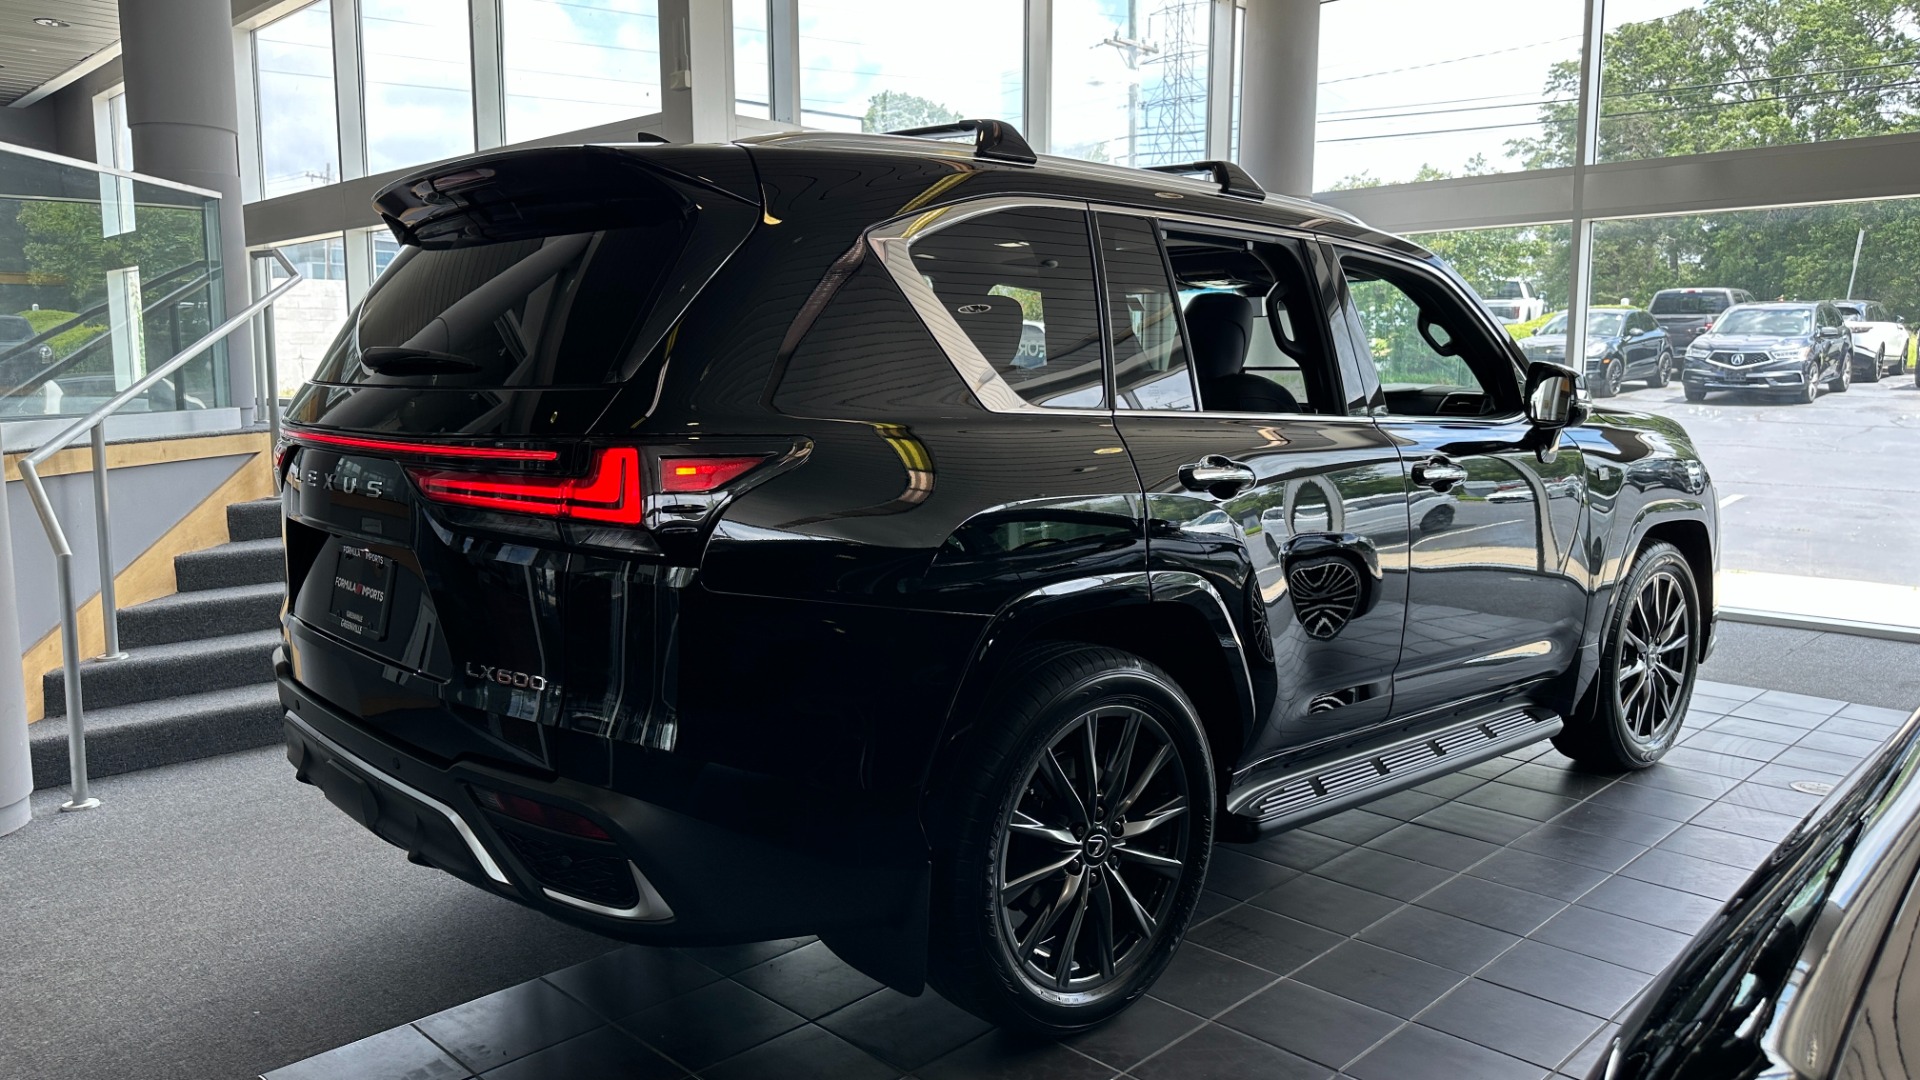 Used 2023 Lexus LX LX 600 F SPORT / MARK LEVINSON / HEIGHT CONTROL / CROSS BARS for sale $138,499 at Formula Imports in Charlotte NC 28227 8